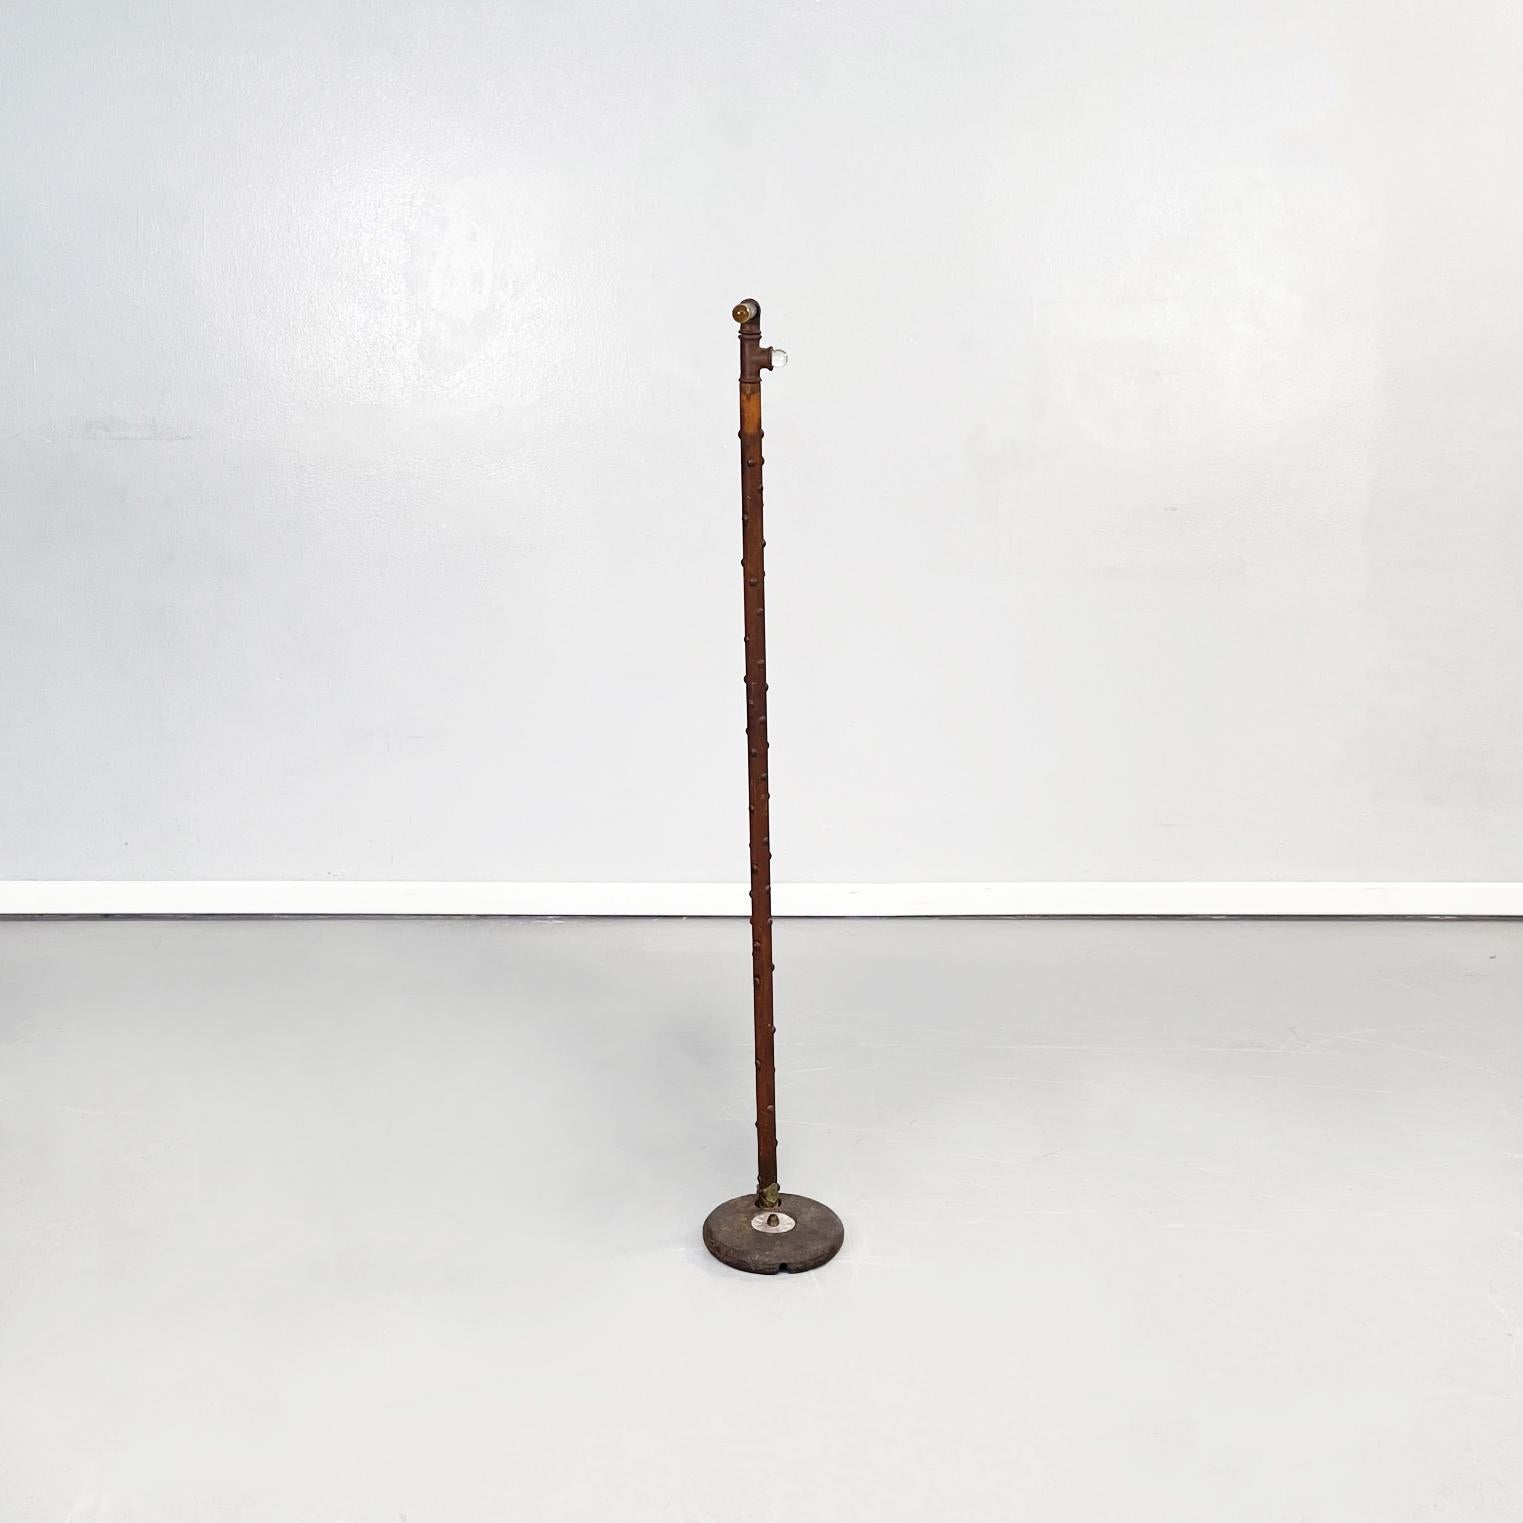 Italian Modern Wooden Valet Clothes Stand with Glass Hooks by Fabiustita, 1990s In Good Condition For Sale In MIlano, IT